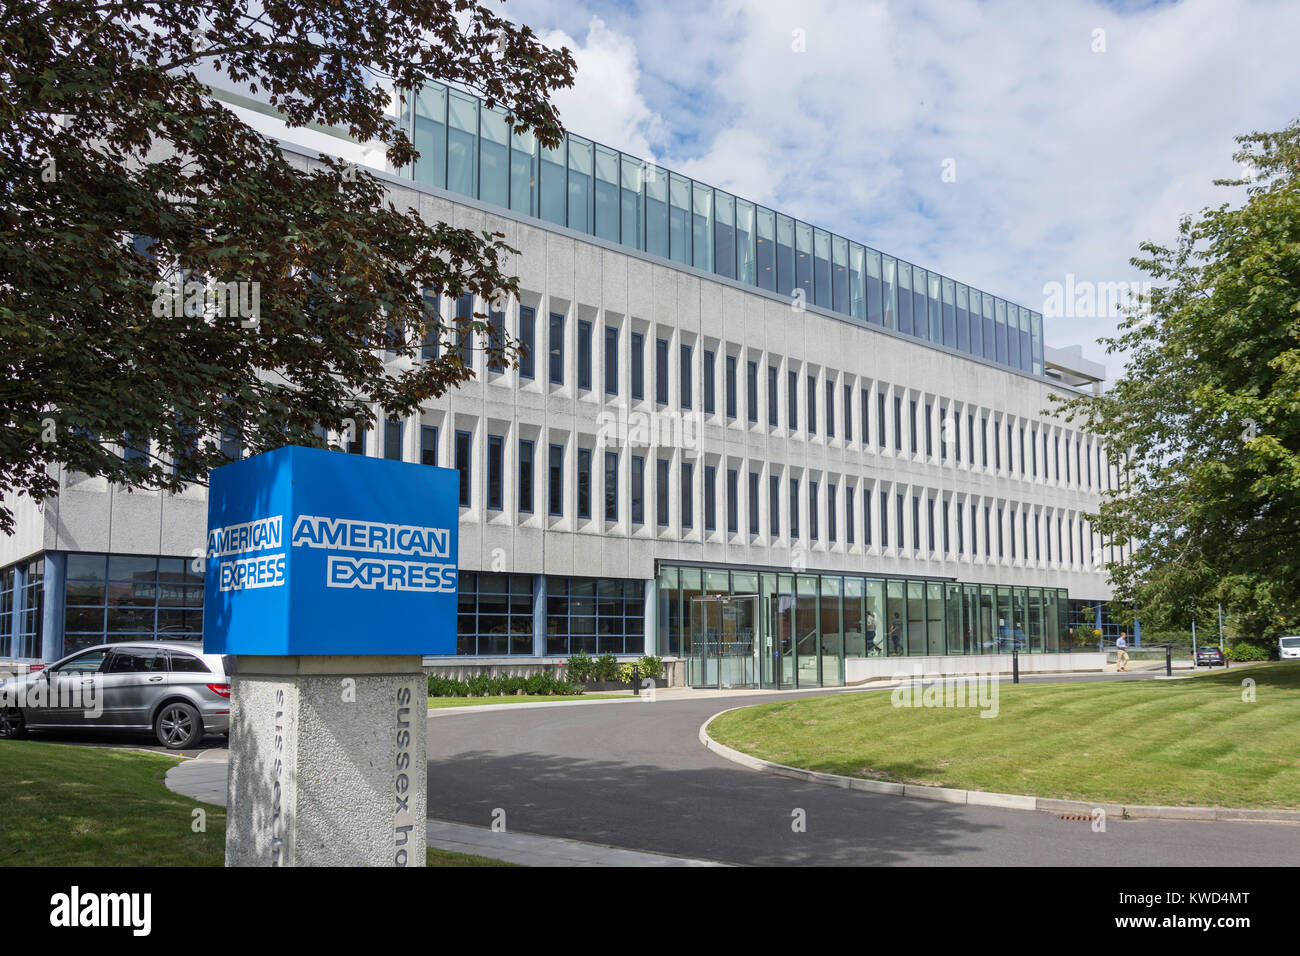 American Express Europe offices, Sussex House, Civic Way, Burgess Hill, West Sussex, England, United Kingdom Stock Photo